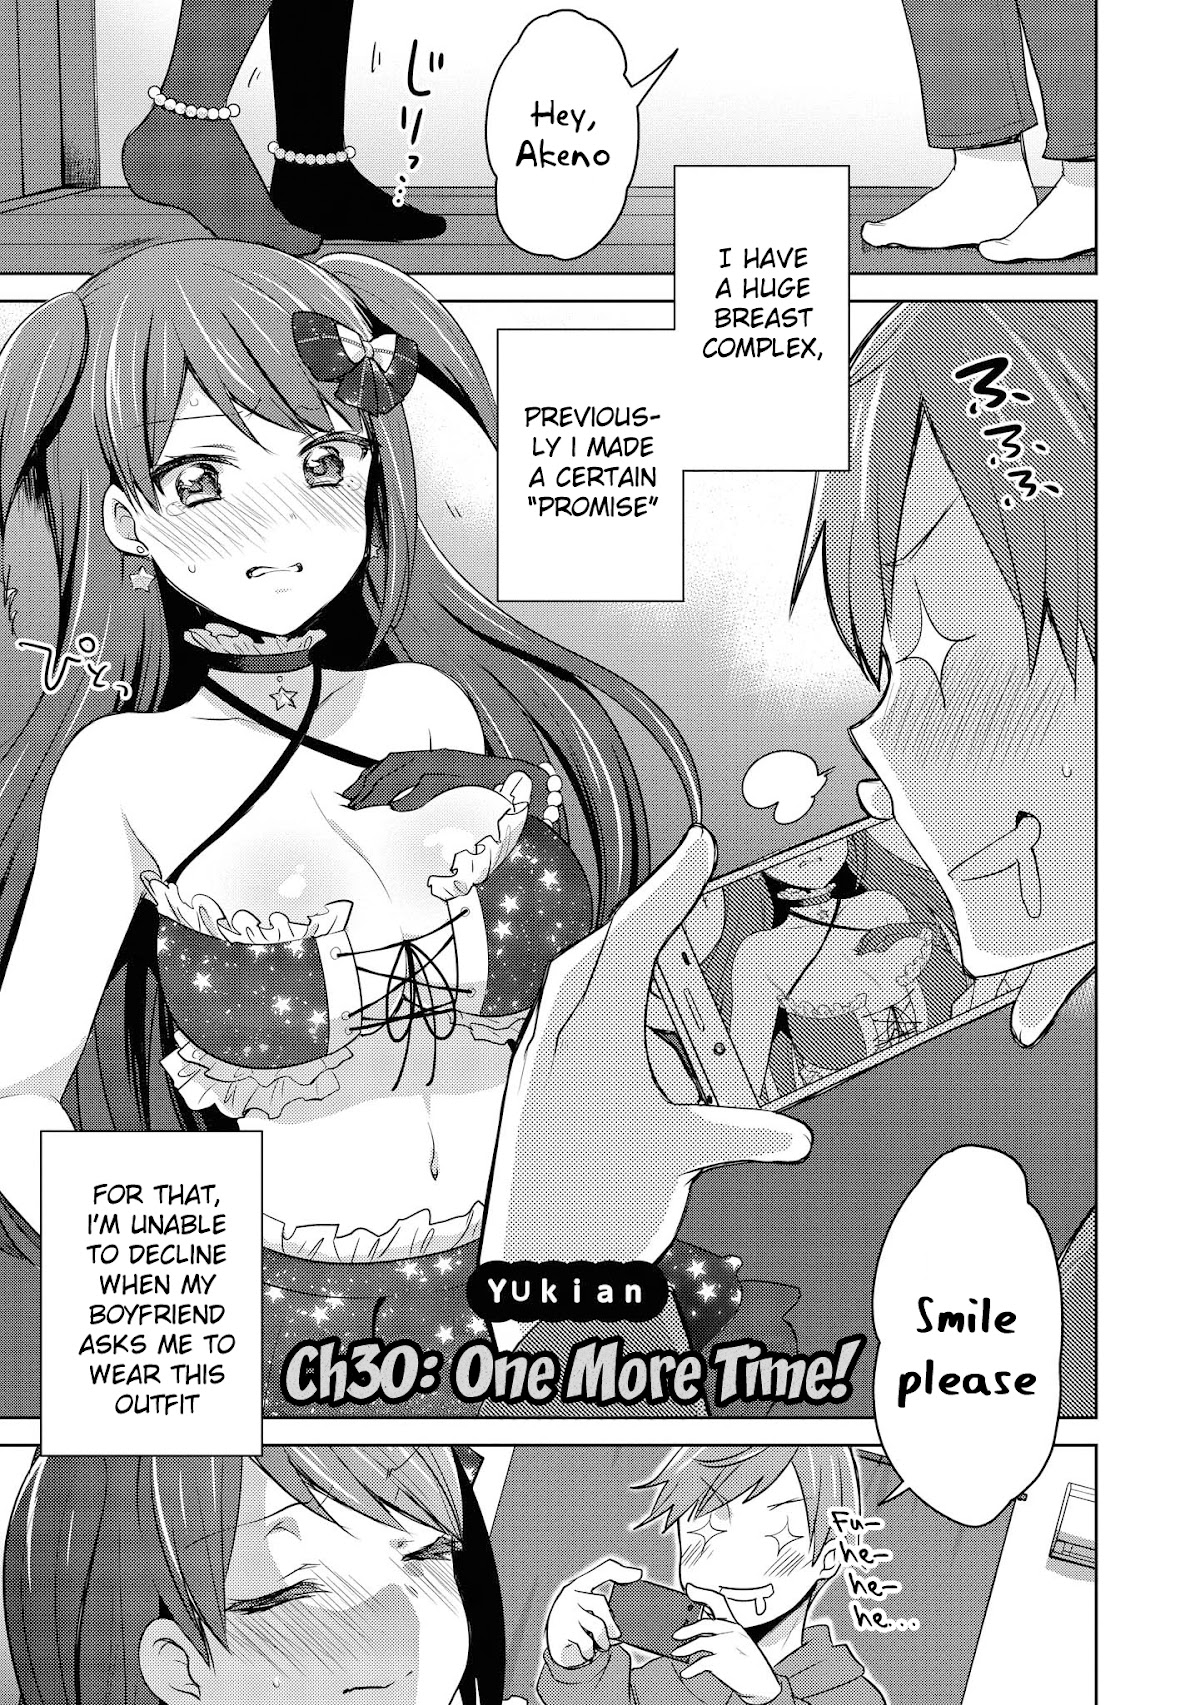 Do You Like Fluffy Boobs? Busty Girl Anthology Comic Chapter 30: Ch 30: One More Time By Yukian - Picture 2